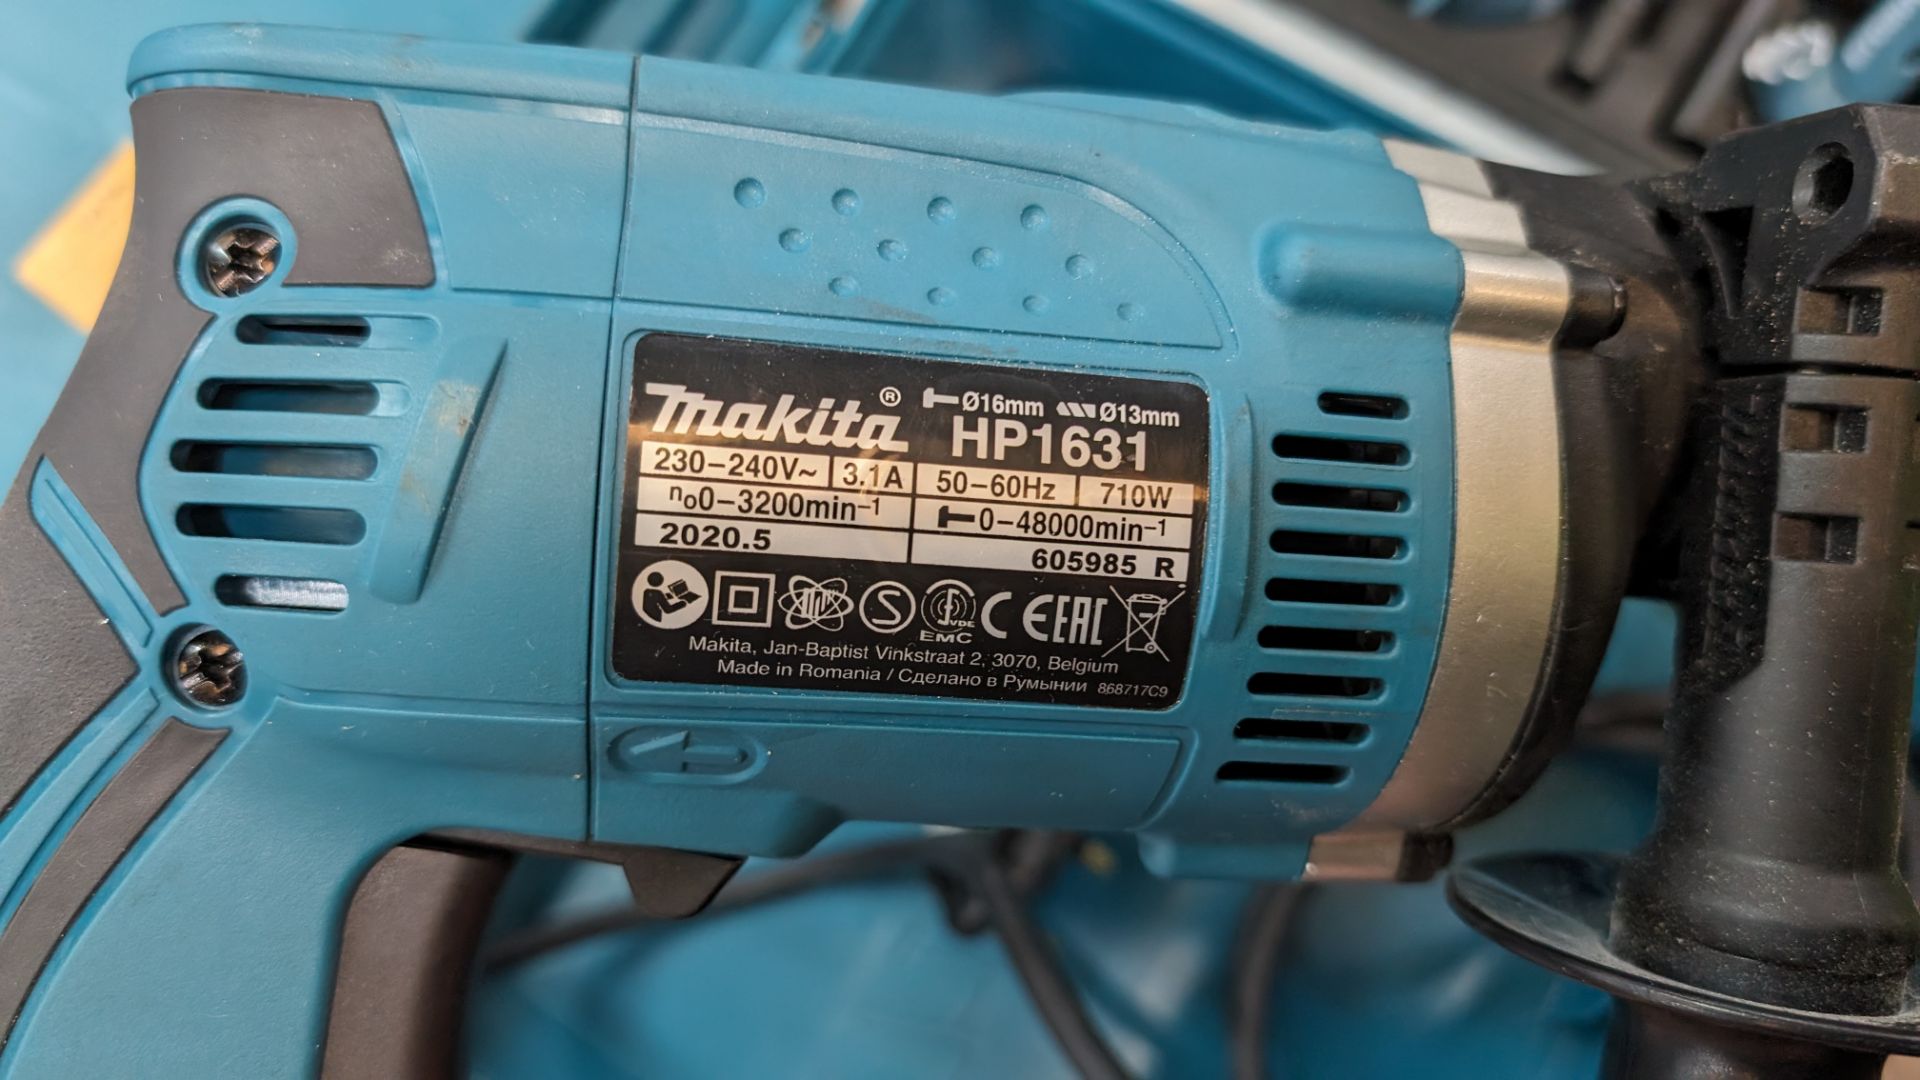 Makita drill model HP1631 in dedicated case with fixings storage - Image 6 of 9